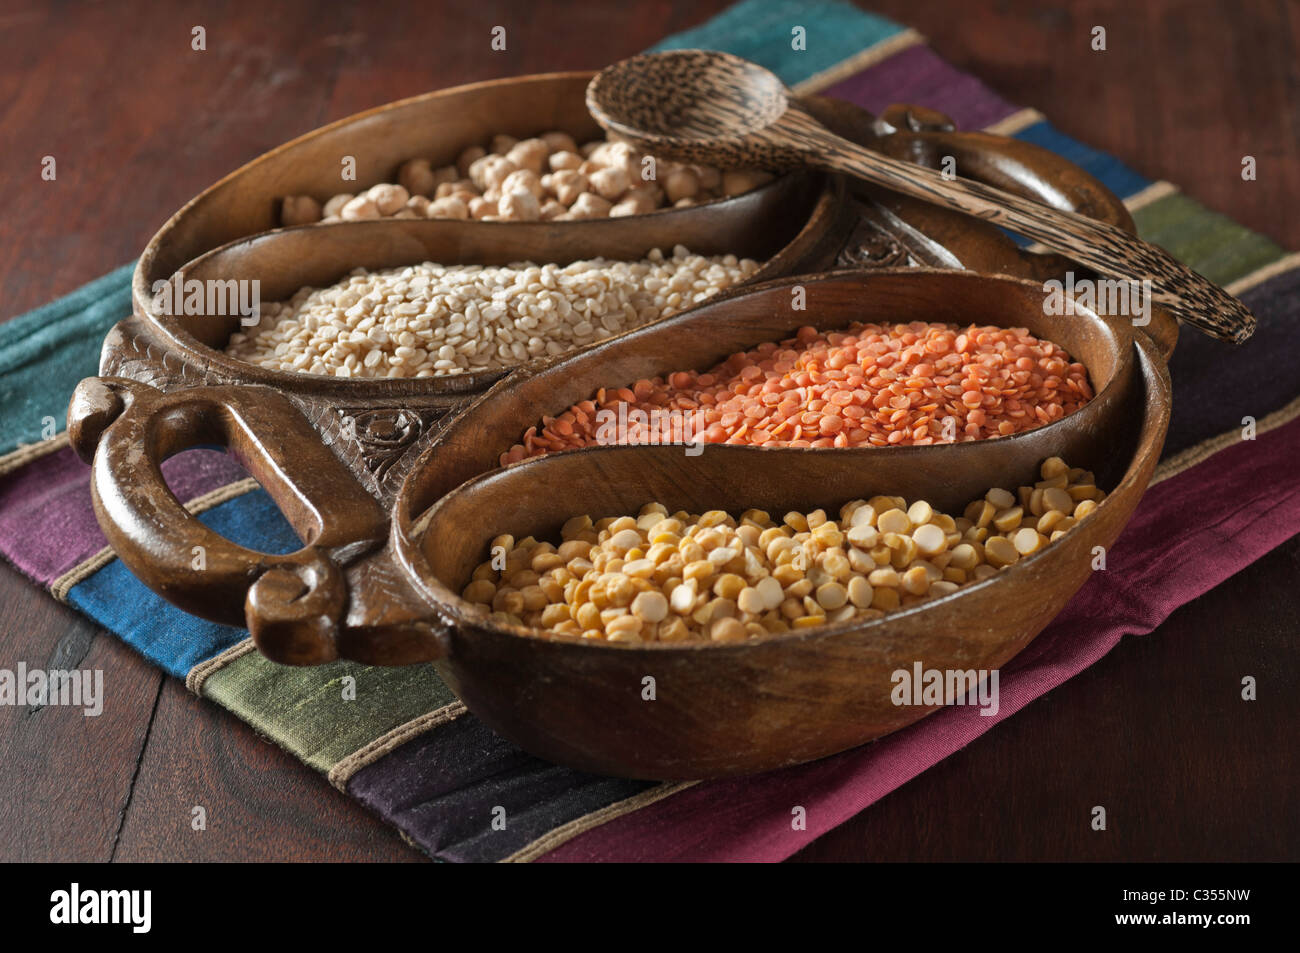 India Asia Dhal Pulses Stock Photo